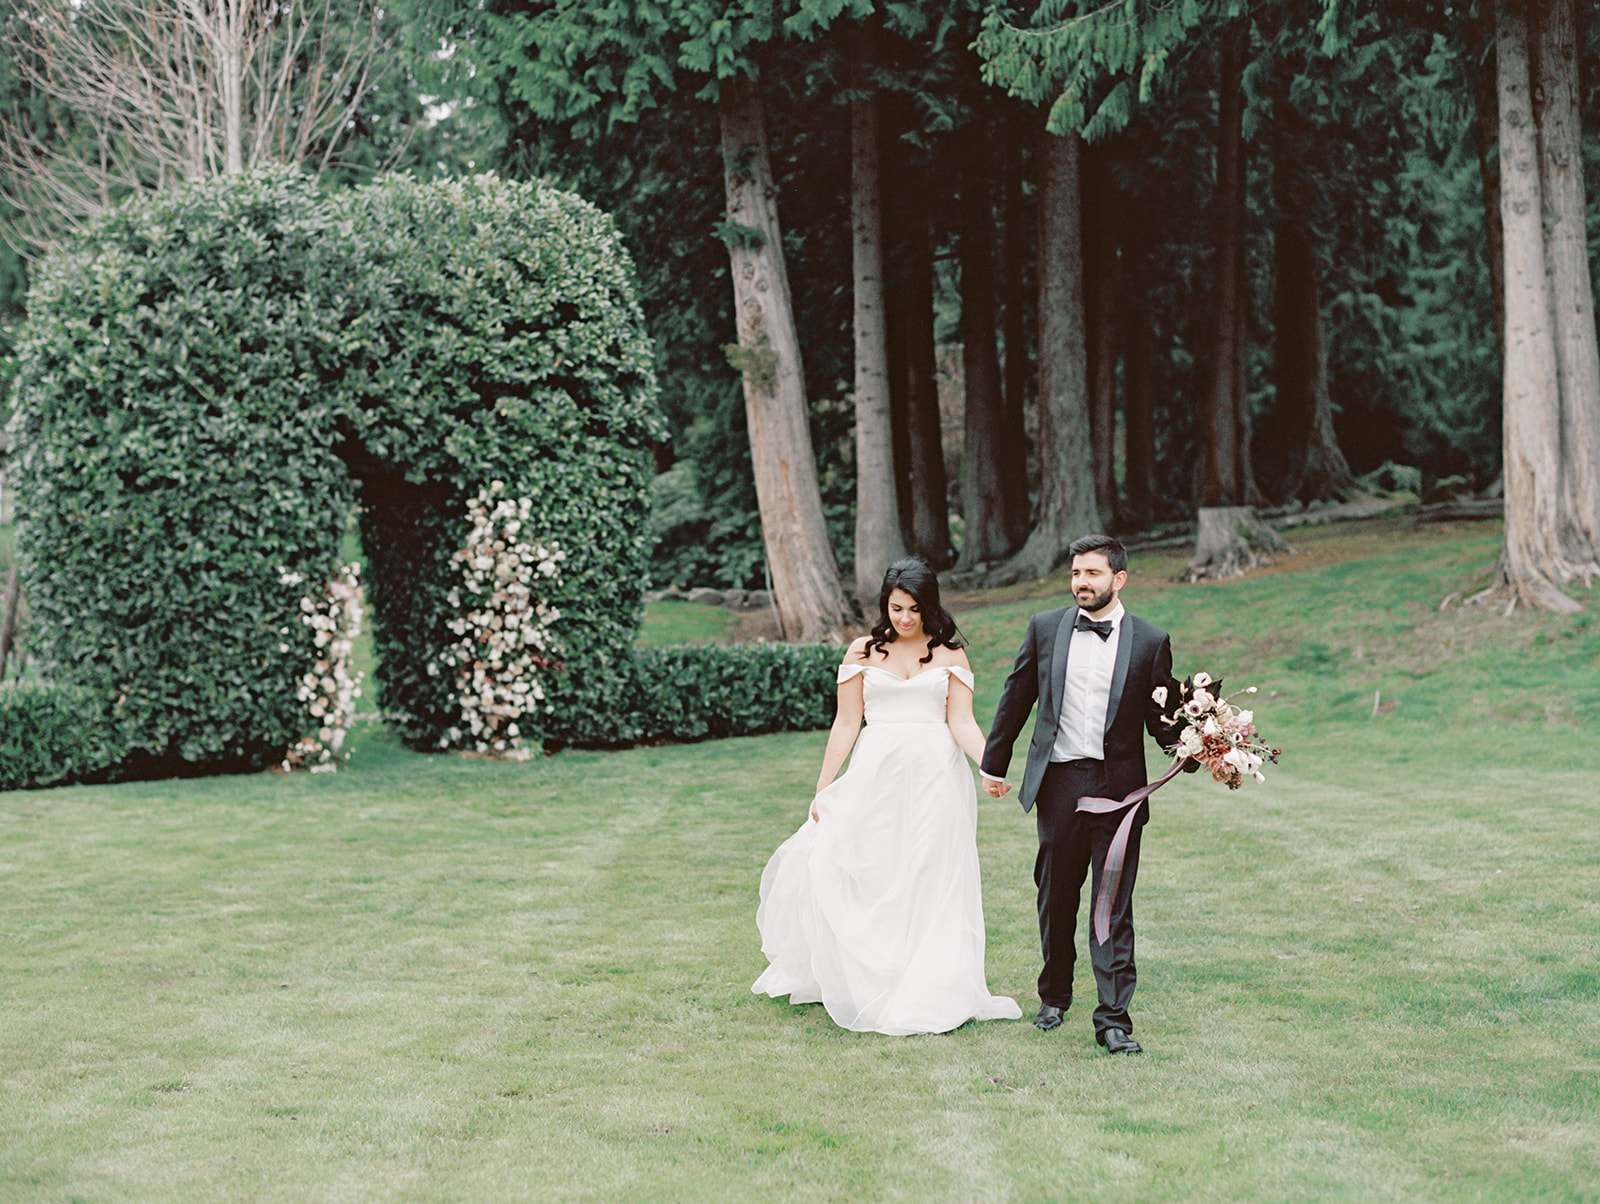 A bride and groom walking across the lawn of Chateau Lill holding hands